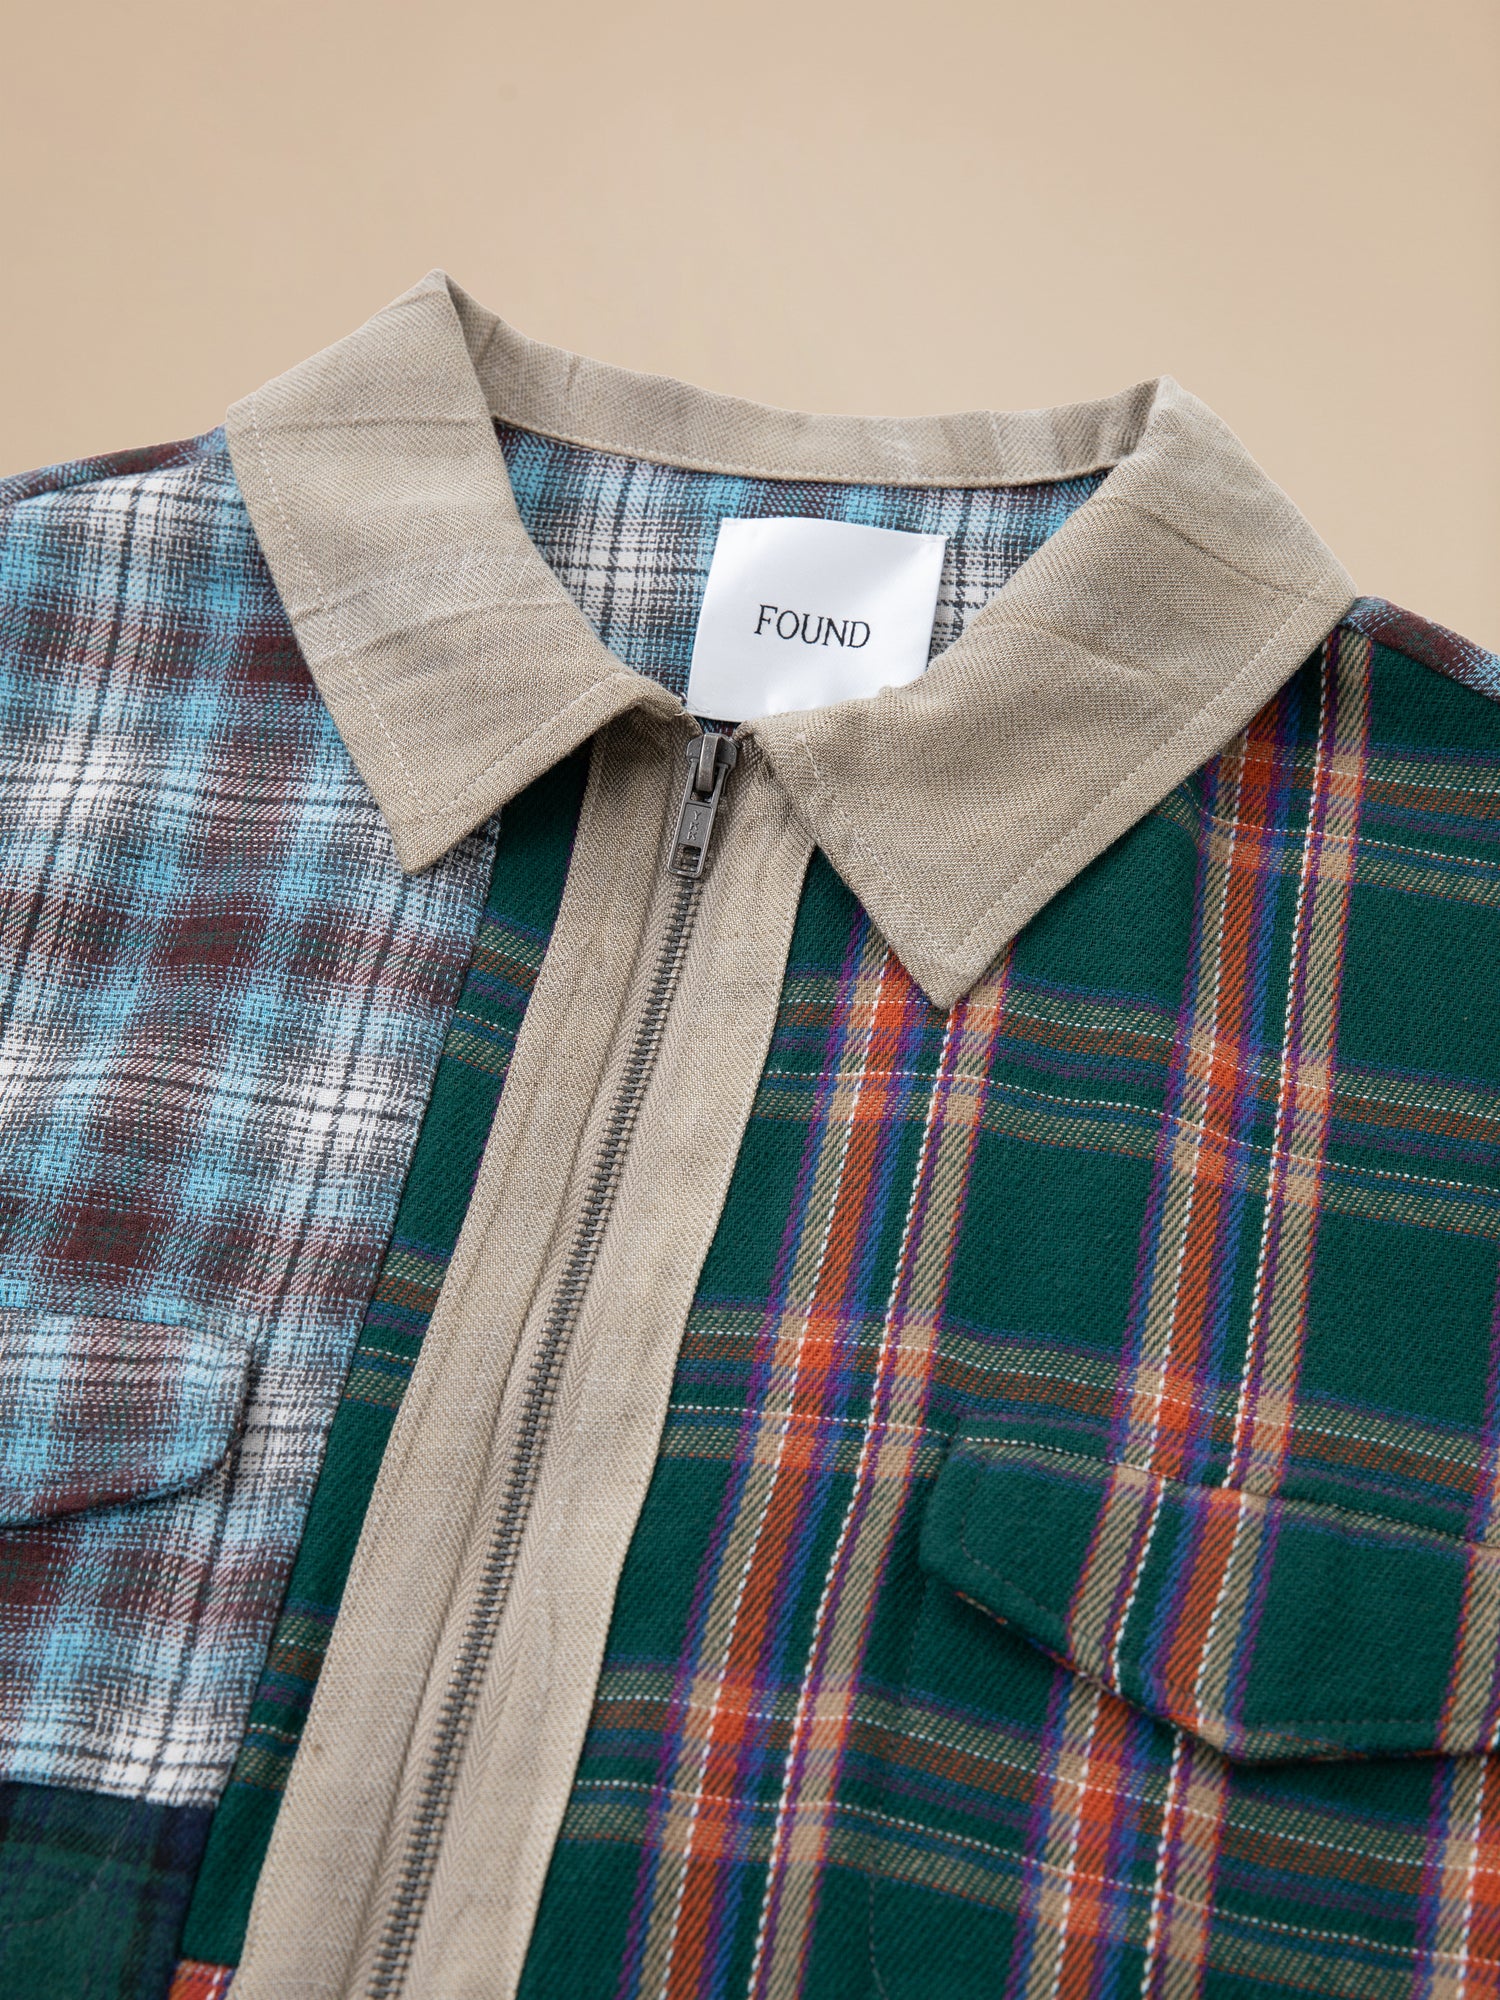 A Multi Plaid Tartan Shirt from Found with a zipper on the front.